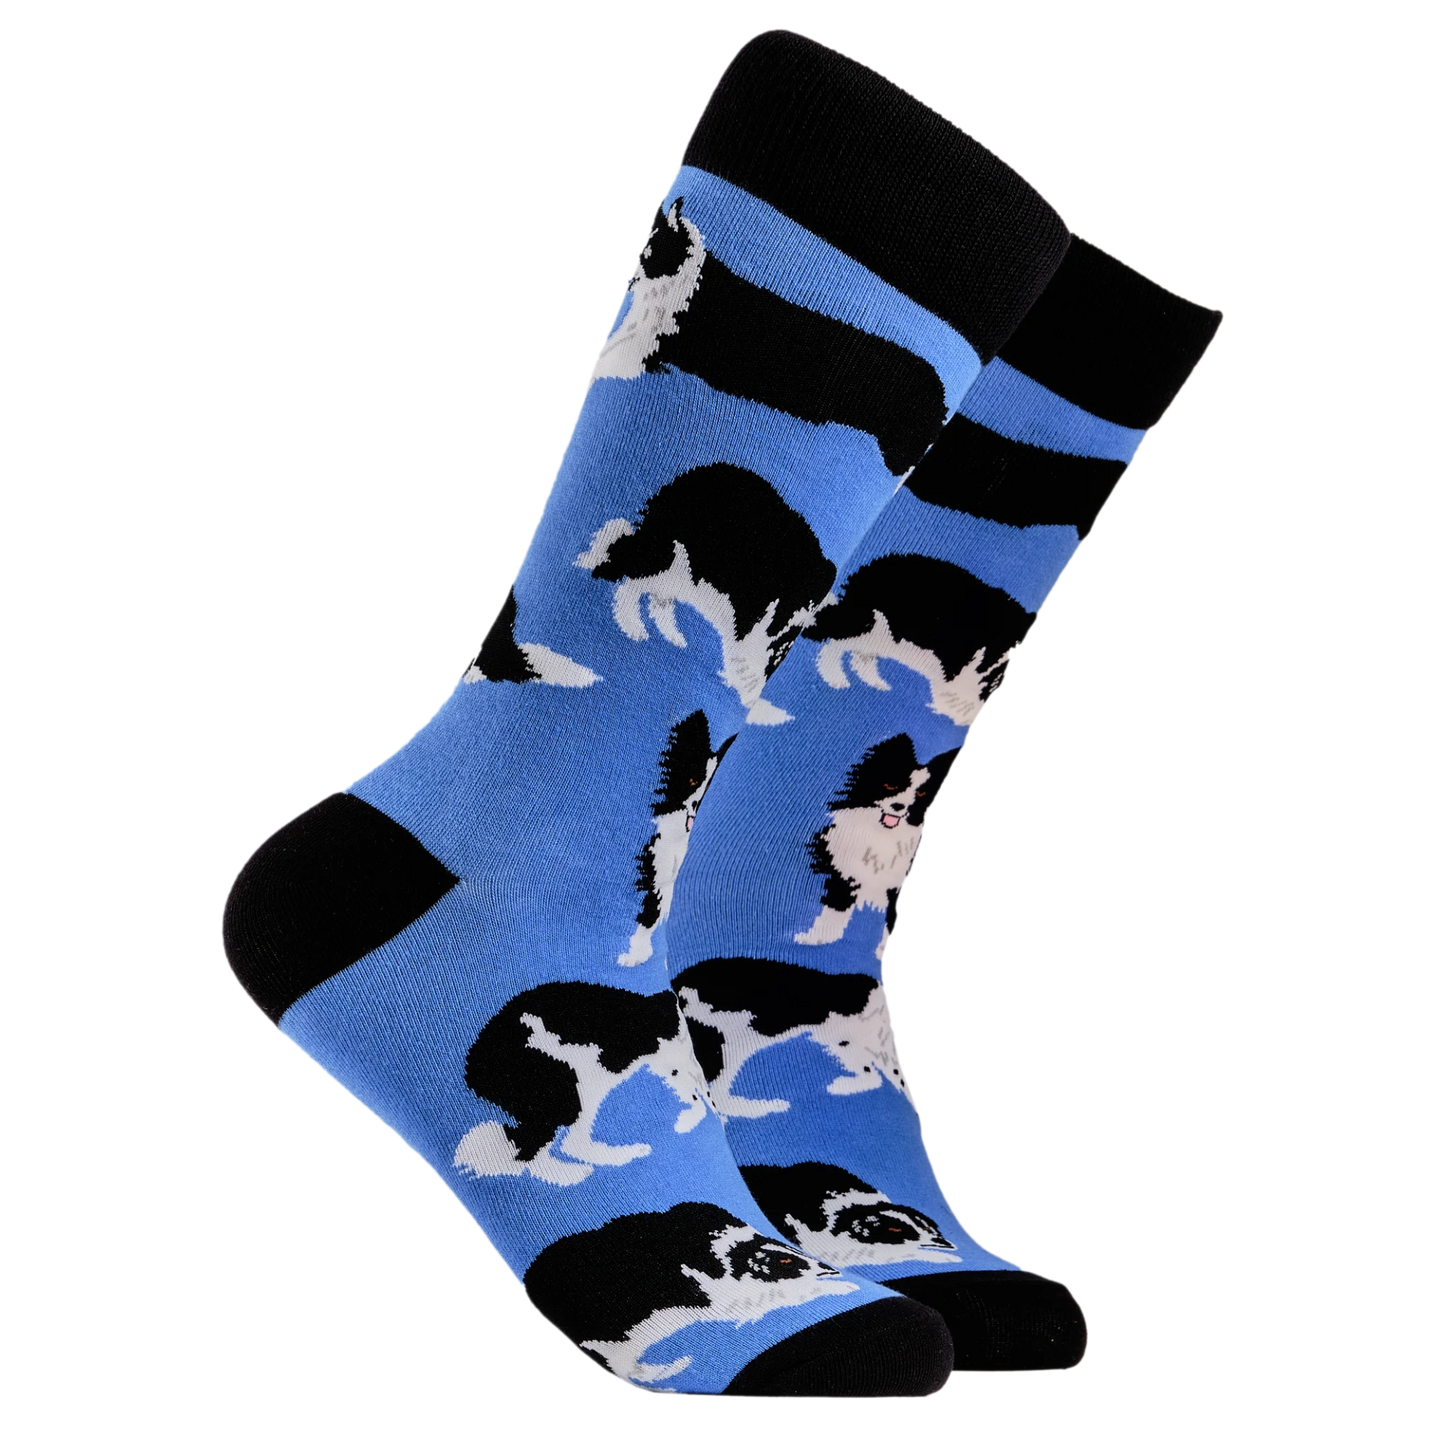 Border Collie Dog Socks - Collies. A pair of socks depicting Border collie dogs. Deep Blue legs, black cuff, heel and toe.